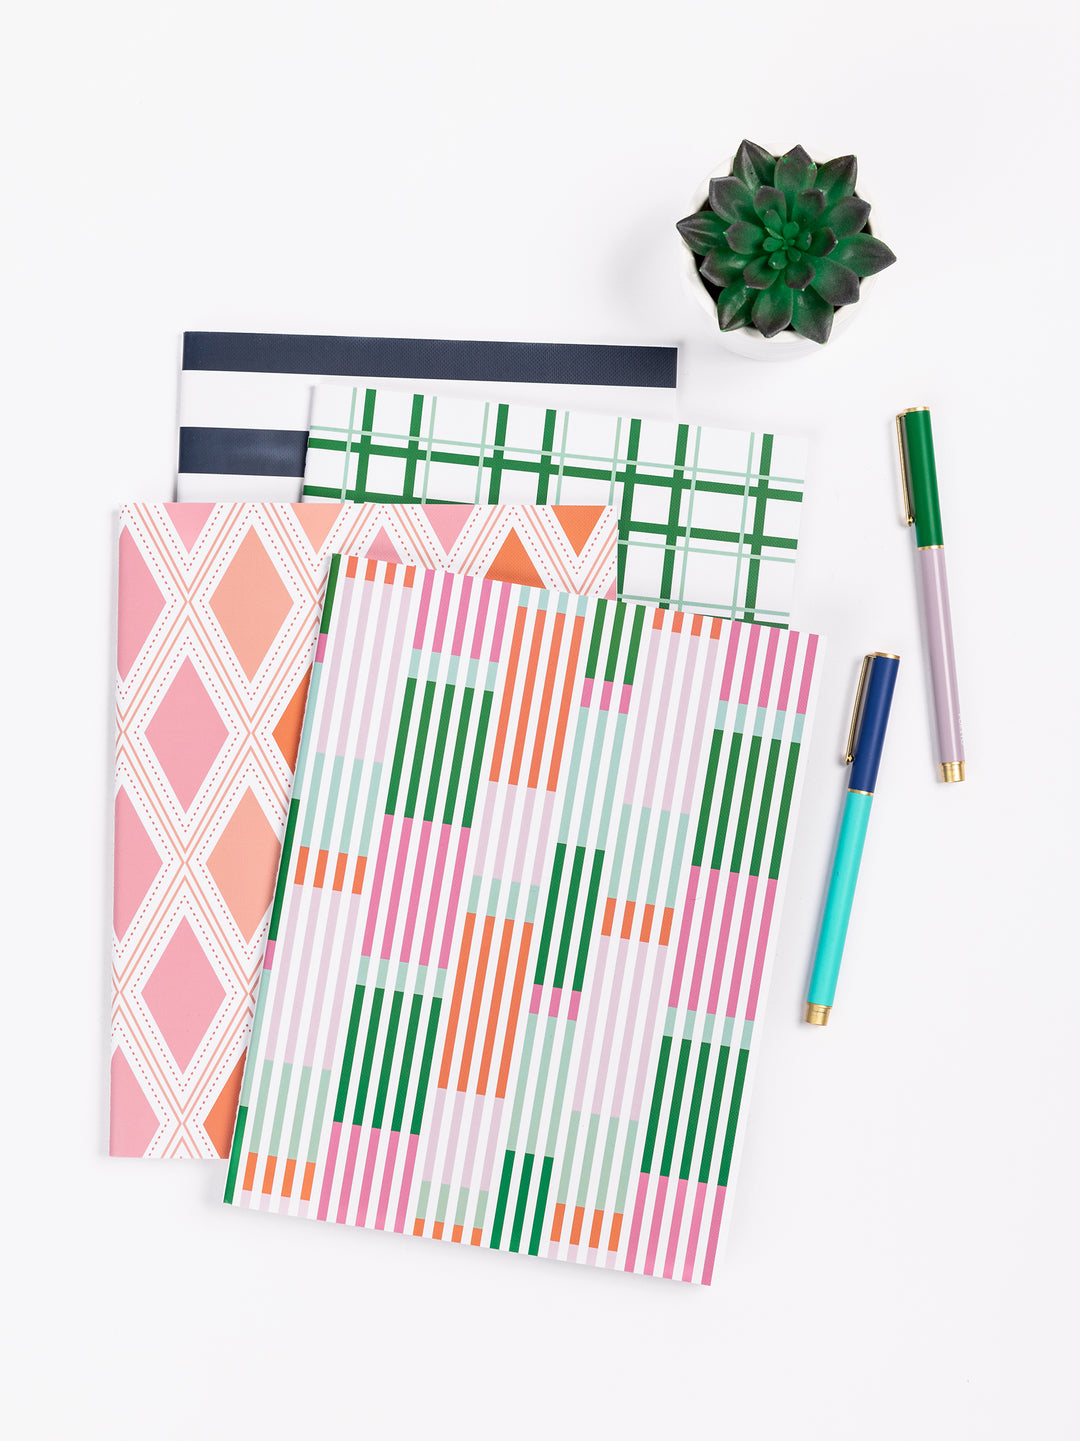 Large Notebook | Line It Up Pink & Green